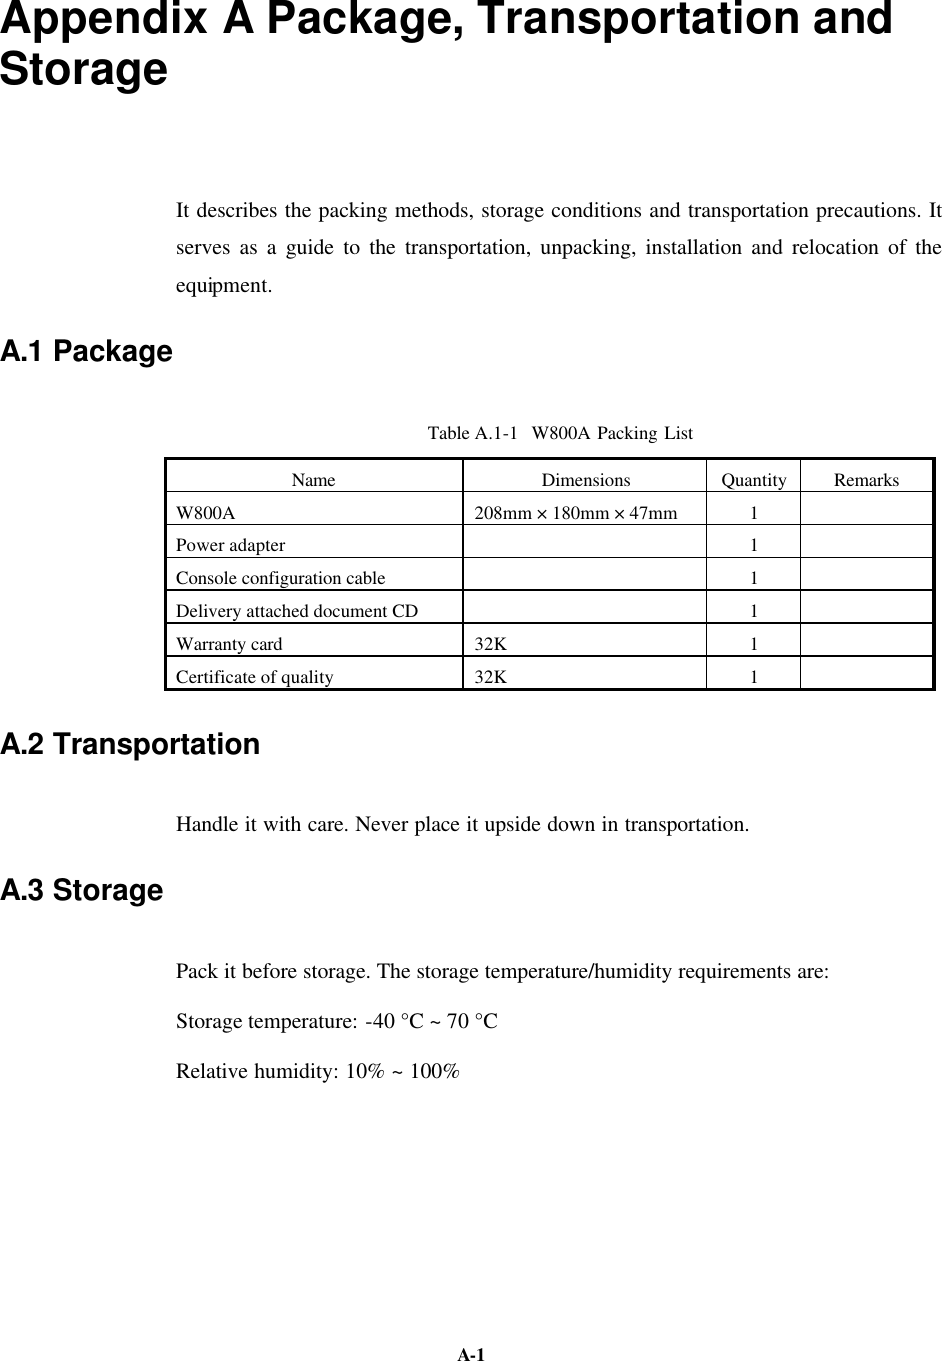   A-1 Appendix A Package, Transportation and Storage It describes the packing methods, storage conditions and transportation precautions. It serves as a guide to the transportation, unpacking, installation and relocation of the equipment. A.1 Package Table A.1-1  W800A Packing List Name Dimensions  Quantity  Remarks W800A 208mm × 180mm × 47mm  1   Power adapter    1   Console configuration cable    1   Delivery attached document CD    1   Warranty card 32K  1   Certificate of quality 32K  1   A.2 Transportation Handle it with care. Never place it upside down in transportation. A.3 Storage Pack it before storage. The storage temperature/humidity requirements are:   Storage temperature: -40 °C ~ 70 °C Relative humidity: 10% ~ 100%   